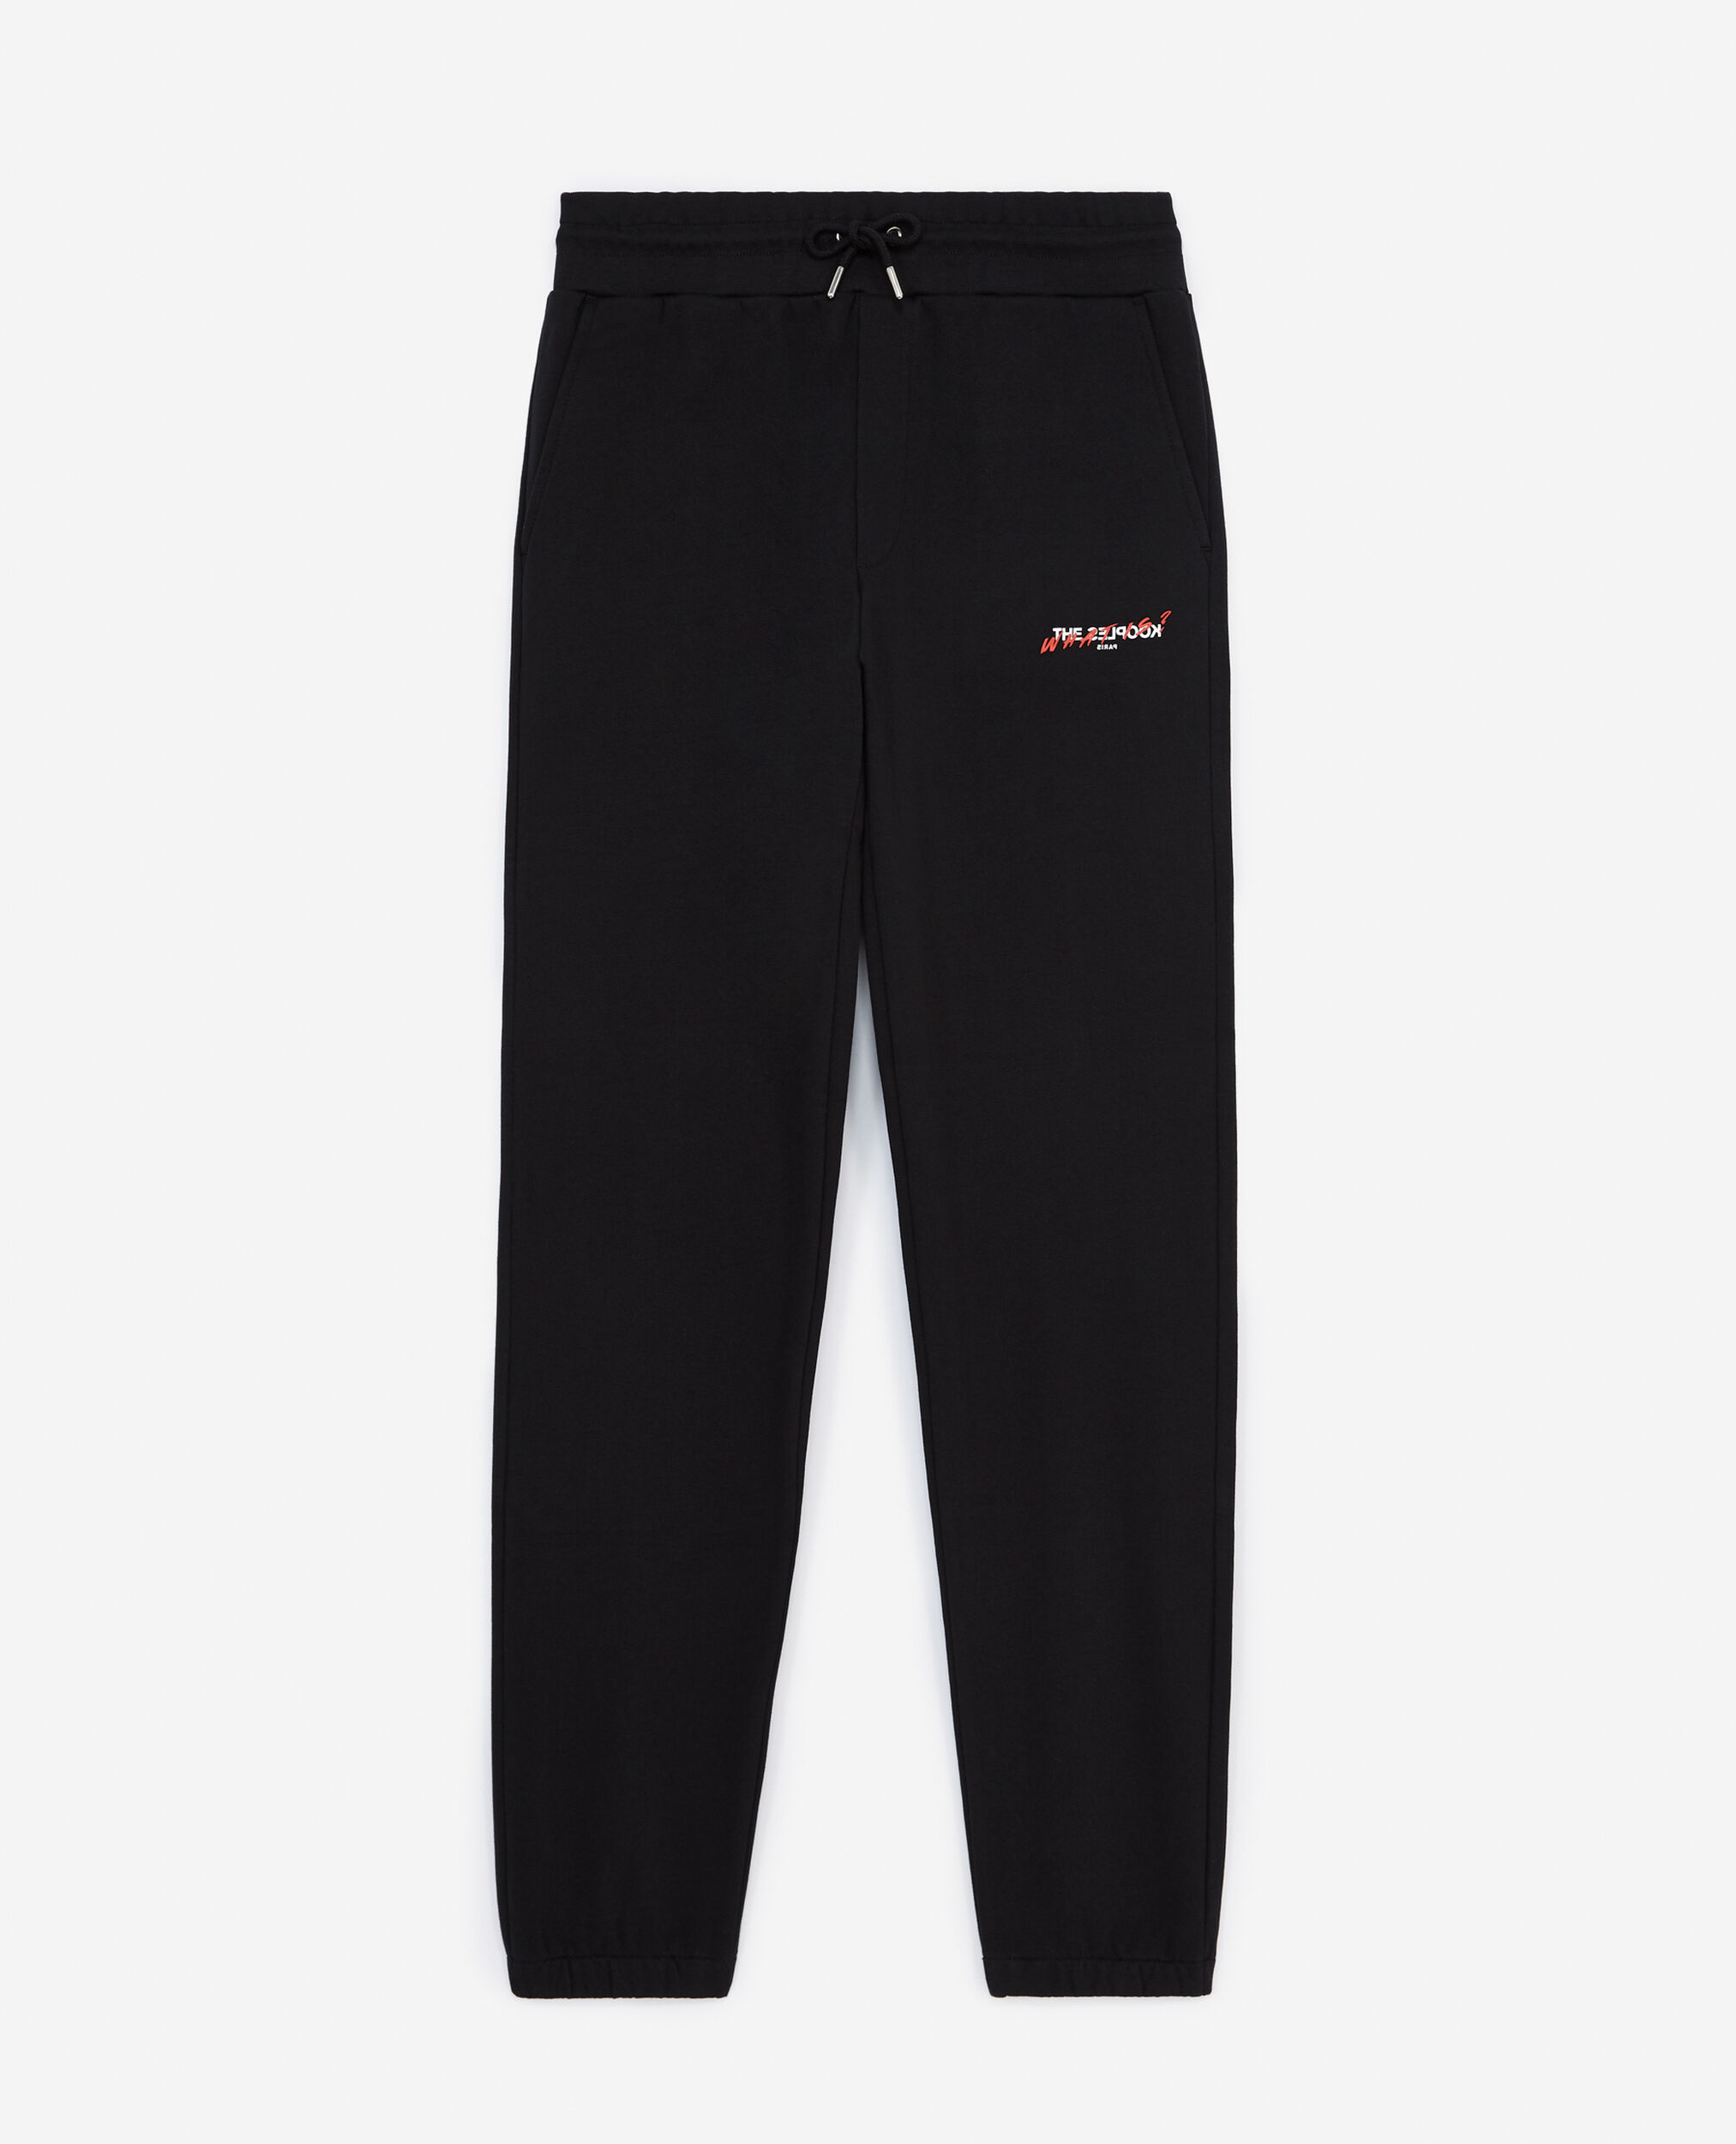 Black joggers with small The Kooples logo, BLACK, hi-res image number null